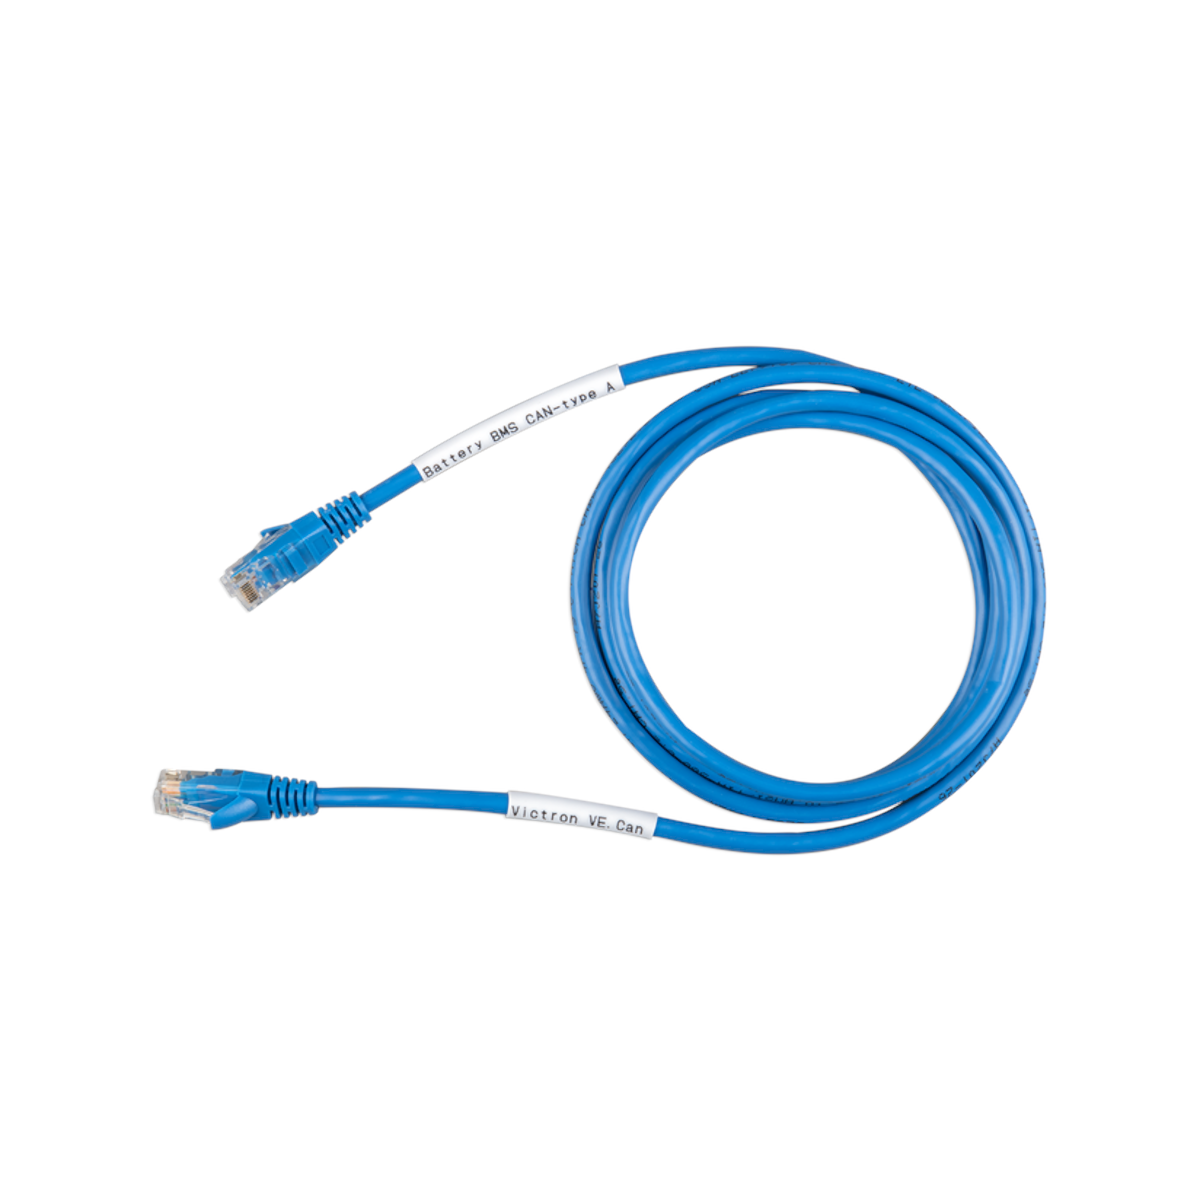 Victron VE.Can zu CAN-bus BMS Typ A Kabel 1.8m